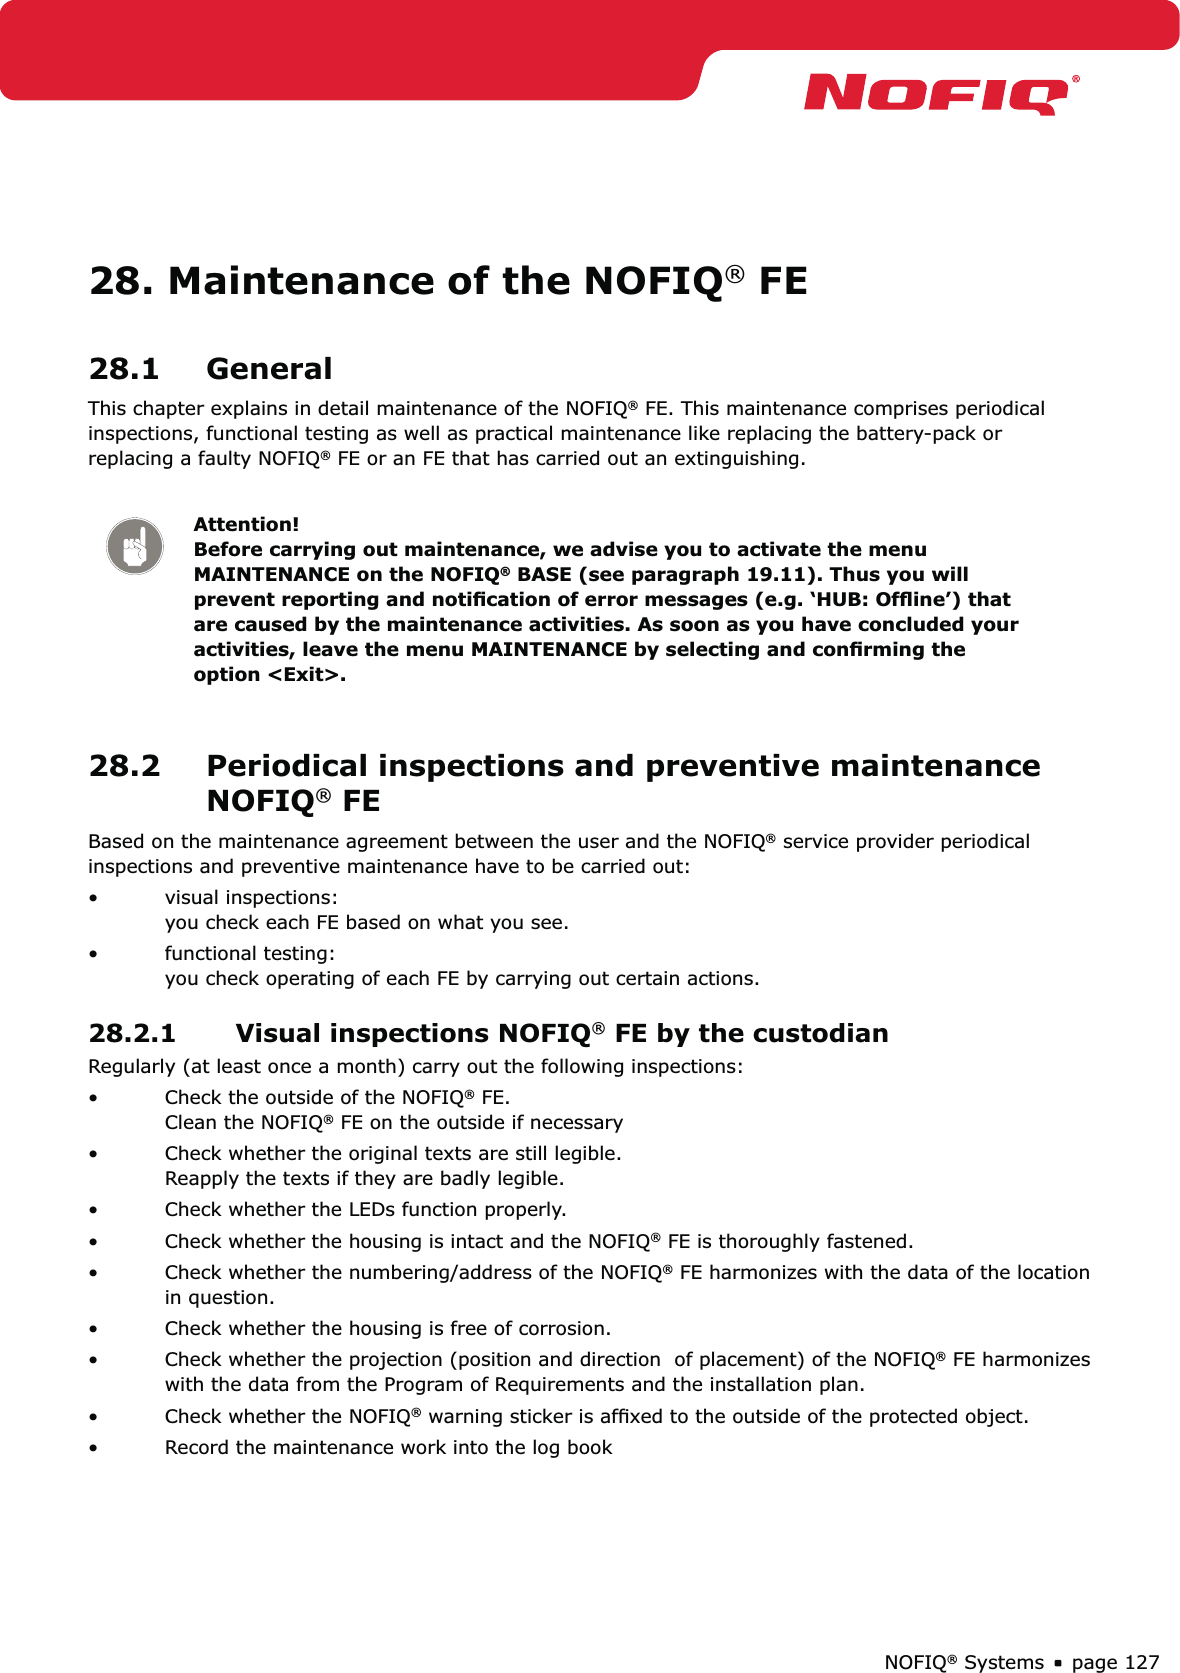 page 127NOFIQ® Systems28. Maintenance of the NOFIQ® FE28.1 GeneralThis chapter explains in detail maintenance of the NOFIQ® FE. This maintenance comprises periodical inspections, functional testing as well as practical maintenance like replacing the battery-pack or replacing a faulty NOFIQ® FE or an FE that has carried out an extinguishing.Attention! Before carrying out maintenance, we advise you to activate the menu MAINTENANCE on the NOFIQ® BASE (see paragraph 19.11). Thus you will prevent reporting and notiﬁcation of error messages (e.g. ‘HUB: Ofﬂine’) that are caused by the maintenance activities. As soon as you have concluded your activities, leave the menu MAINTENANCE by selecting and conﬁrming the option &lt;Exit&gt;.28.2  Periodical inspections and preventive maintenance NOFIQ® FEBased on the maintenance agreement between the user and the NOFIQ® service provider periodical inspections and preventive maintenance have to be carried out:visual inspections: • you check each FE based on what you see.functional testing: • you check operating of each FE by carrying out certain actions.28.2.1  Visual inspections NOFIQ® FE by the custodianRegularly (at least once a month) carry out the following inspections:Check the outside of the NOFIQ•  ® FE. Clean the NOFIQ® FE on the outside if necessaryCheck whether the original texts are still legible. • Reapply the texts if they are badly legible.Check whether the LEDs function properly.• Check whether the housing is intact and the NOFIQ•  ® FE is thoroughly fastened.Check whether the numbering/address of the NOFIQ•  ® FE harmonizes with the data of the location in question.Check whether the housing is free of corrosion.  • Check whether the projection (position and direction  of placement) of the NOFIQ•  ® FE harmonizes with the data from the Program of Requirements and the installation plan.Check whether the NOFIQ•  ® warning sticker is afﬁxed to the outside of the protected object. Record the maintenance work into the log book• 